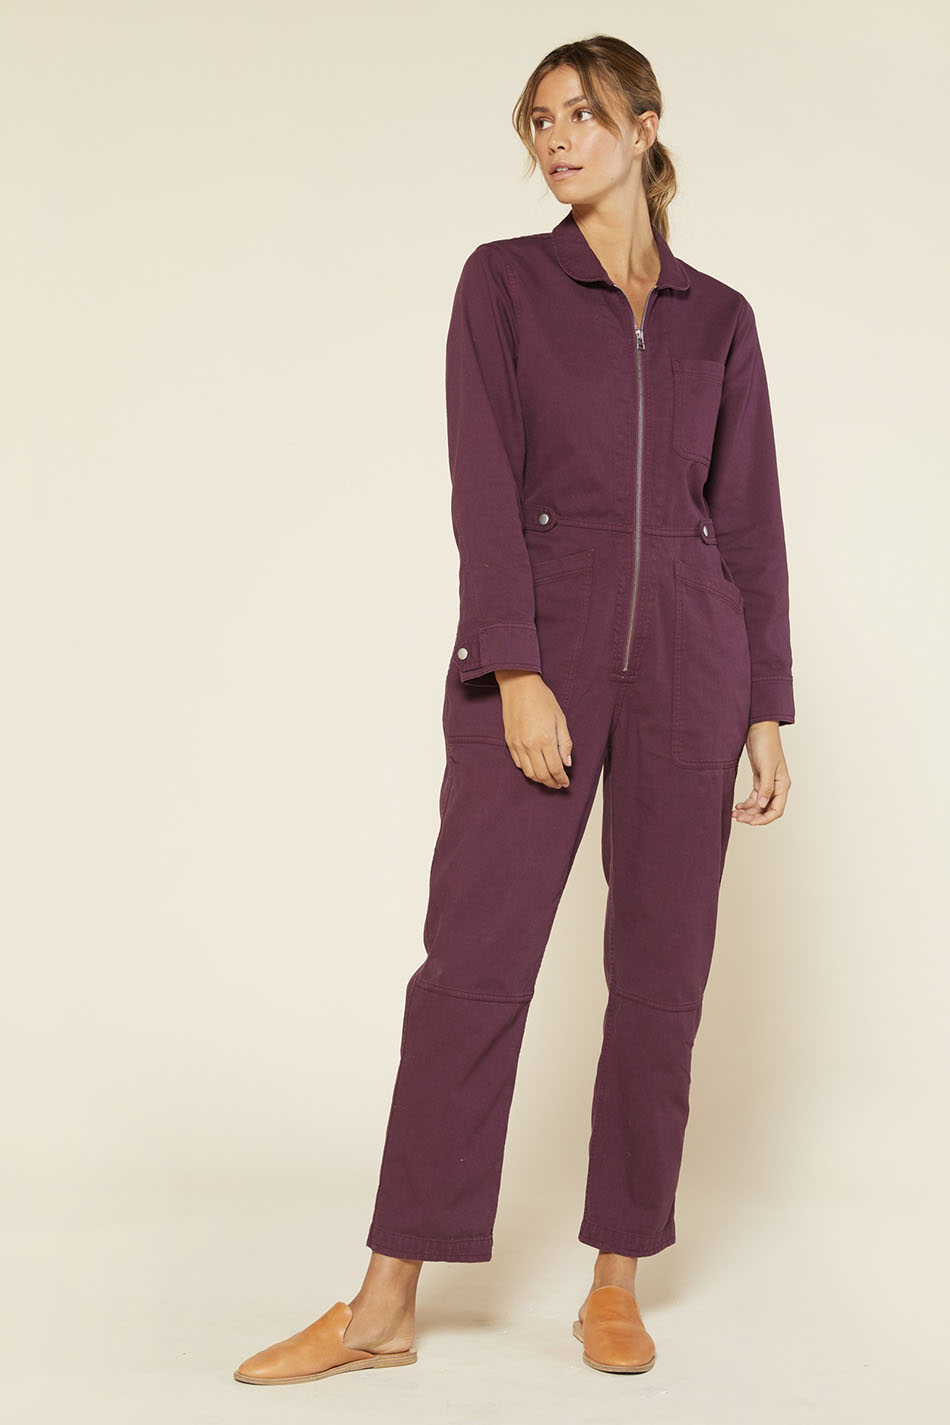 Plum jumpsuit by outerknown